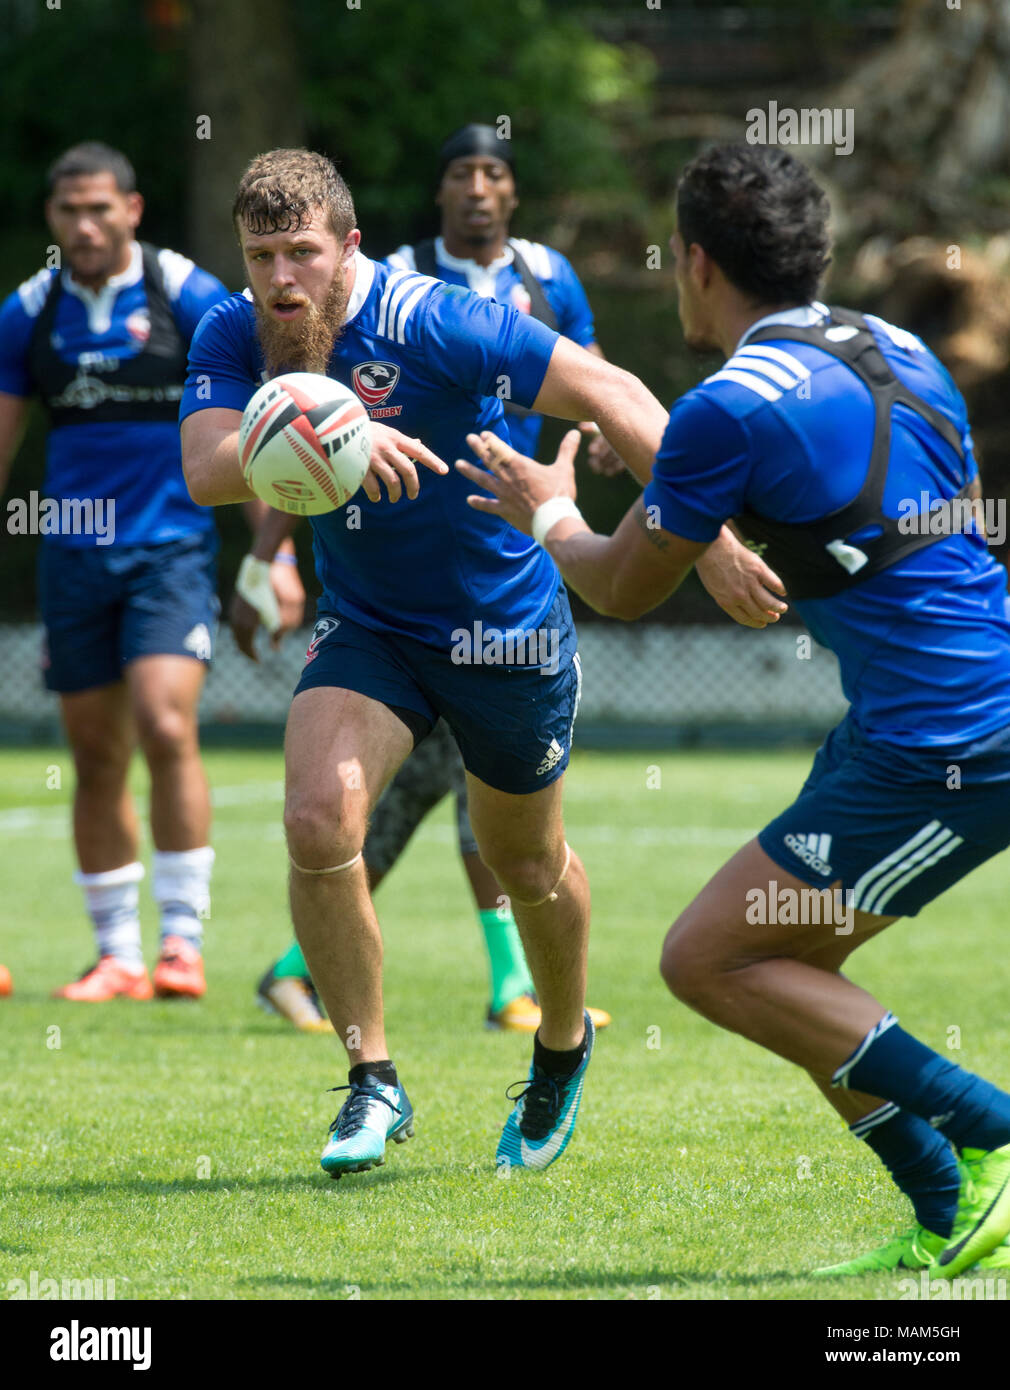 HONG KONG,HONG KONG SAR,CHINA:April 3rd 2018. The USA Rugby team conduct a training session at So Kon Po recreation ground ahead of their Hong Kong Rugby 7's matches. Stephen Tomasin passes the ball during drills.Alamy Live News Stock Photo